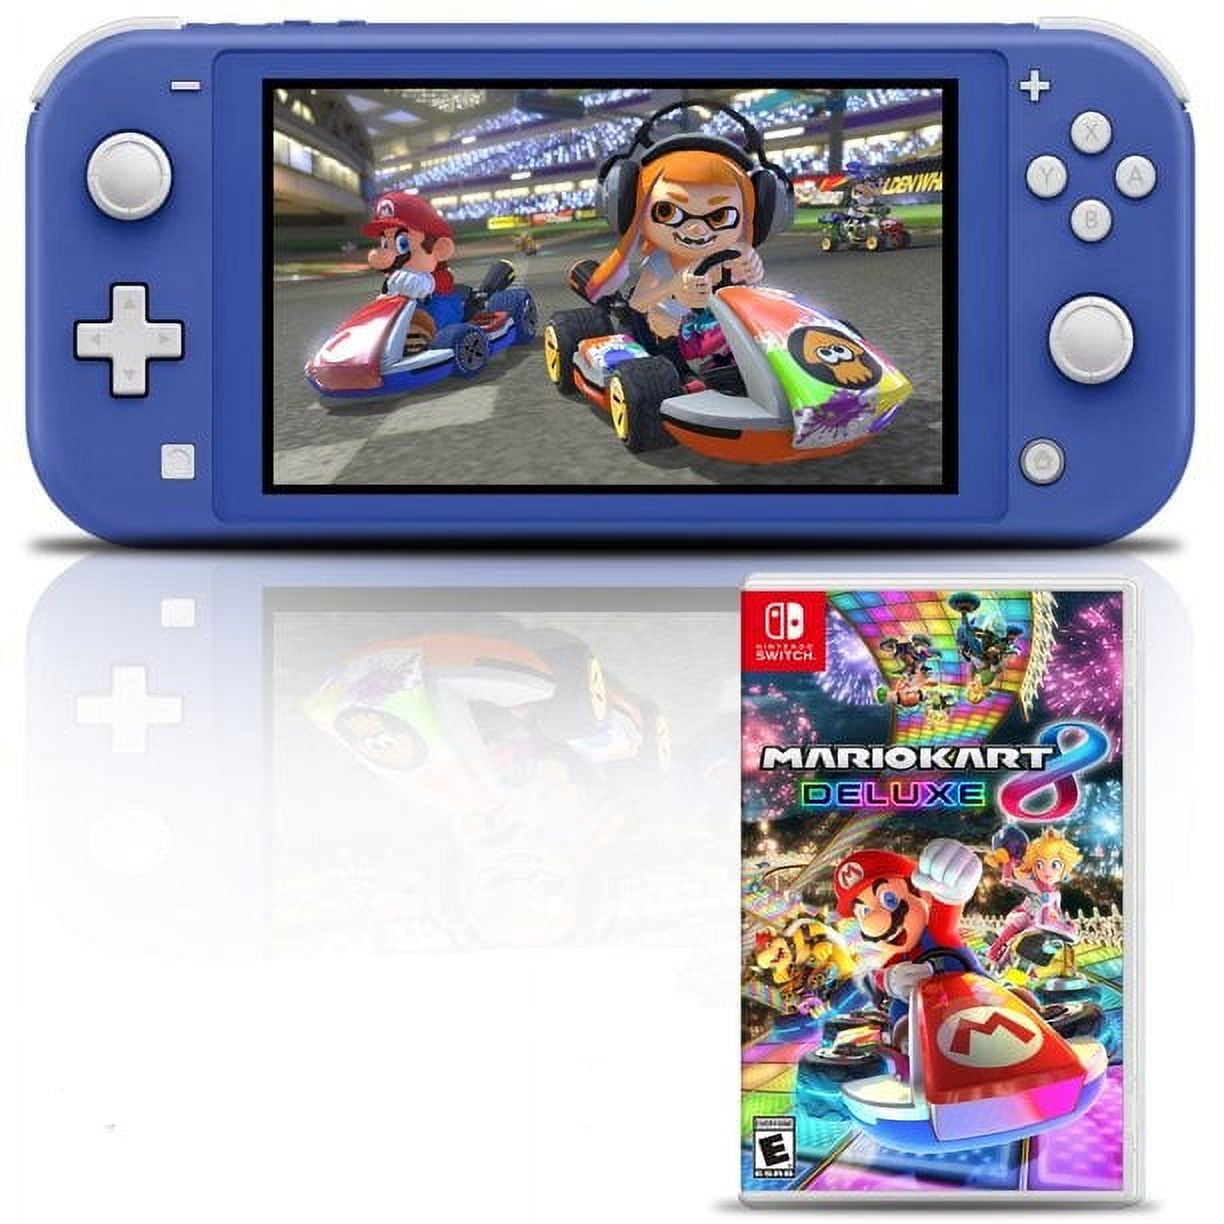 Nintendo Switch Lite (Blue) Gaming Console Bundle with Mario Kart 